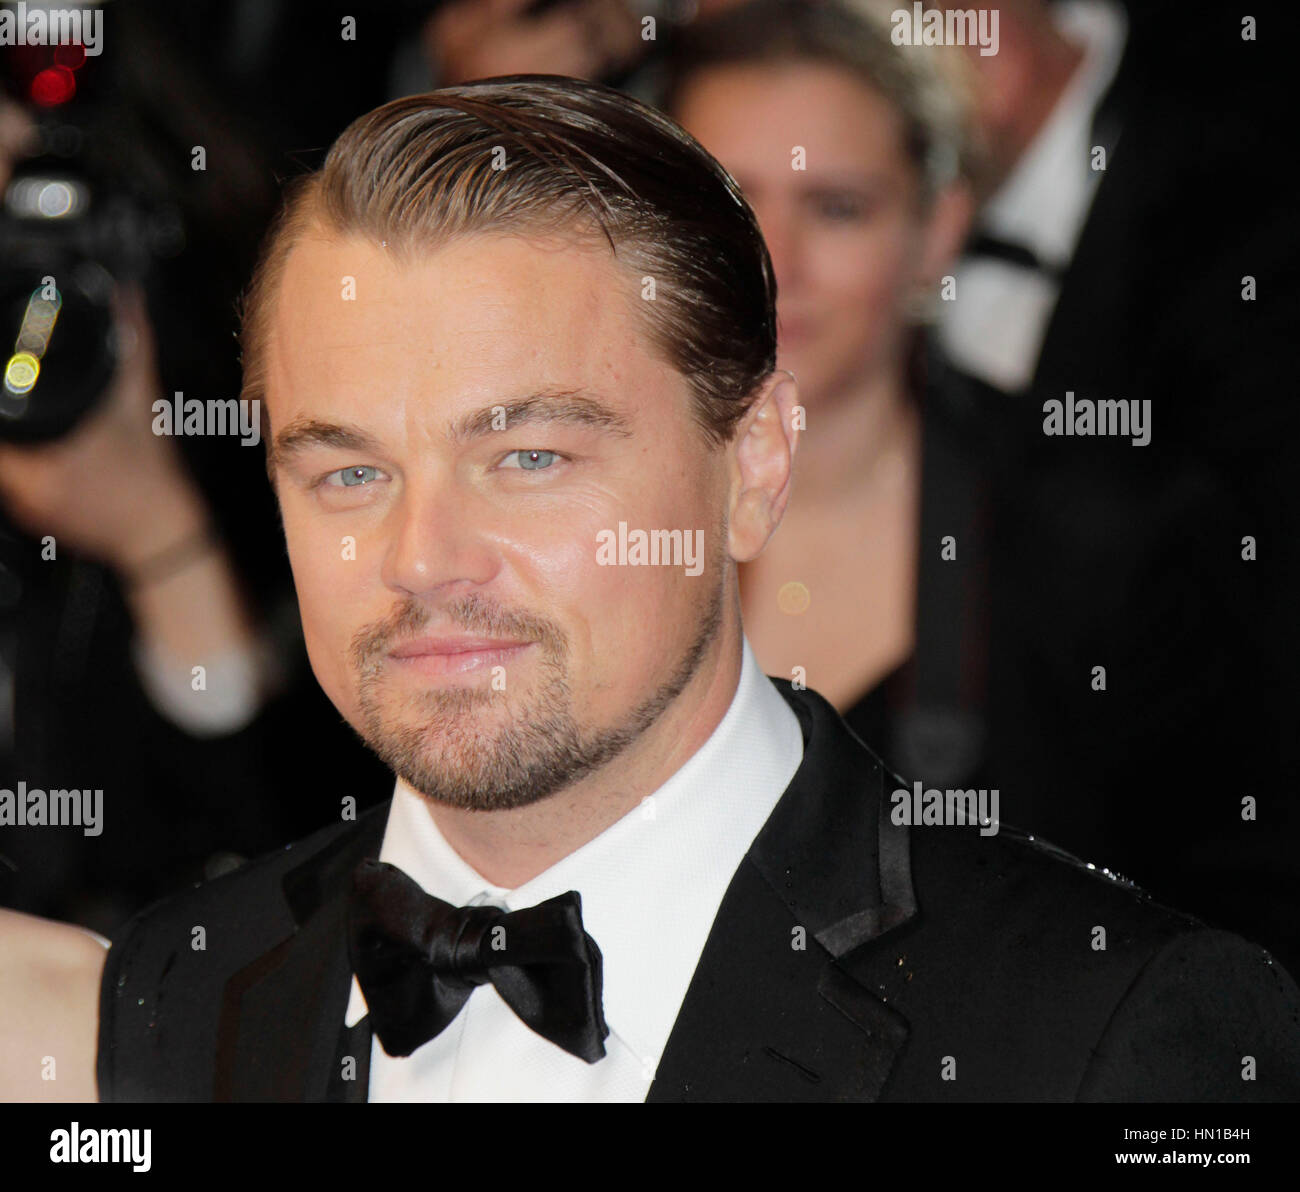 Leonardo DiCaprio attends the premiere for the film, 'The Great Gatsby' at the 66th Cannes Film Festival in Cannes, France on May 15, 2013. Photo by Francis Specker Stock Photo